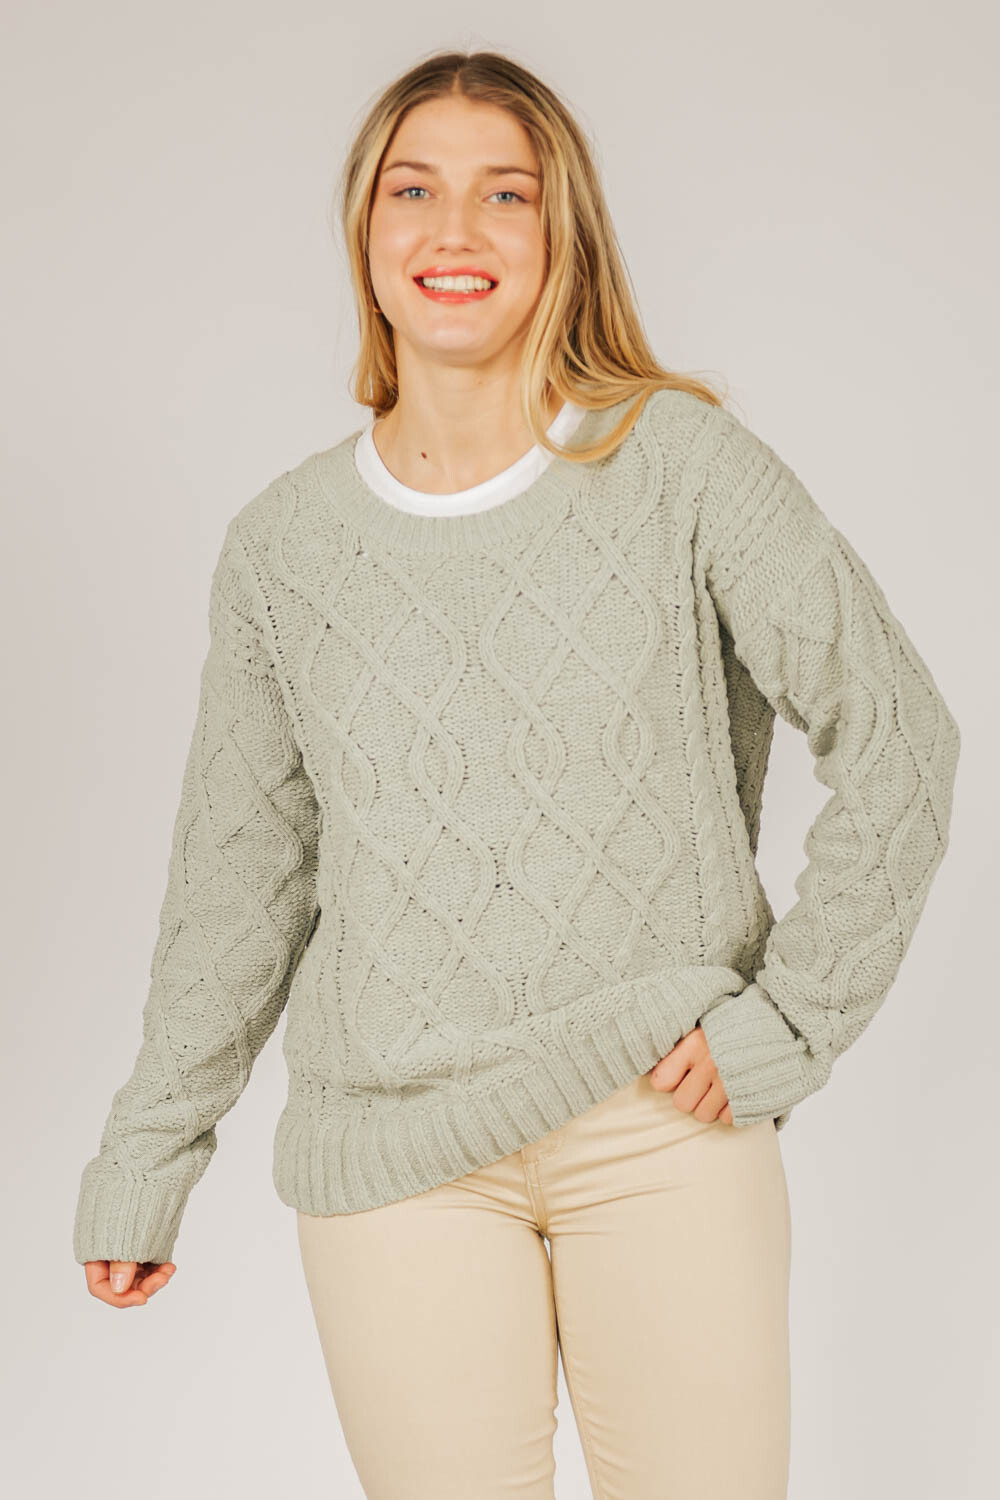 Sweater Loanina Verde Grisaceo Claro